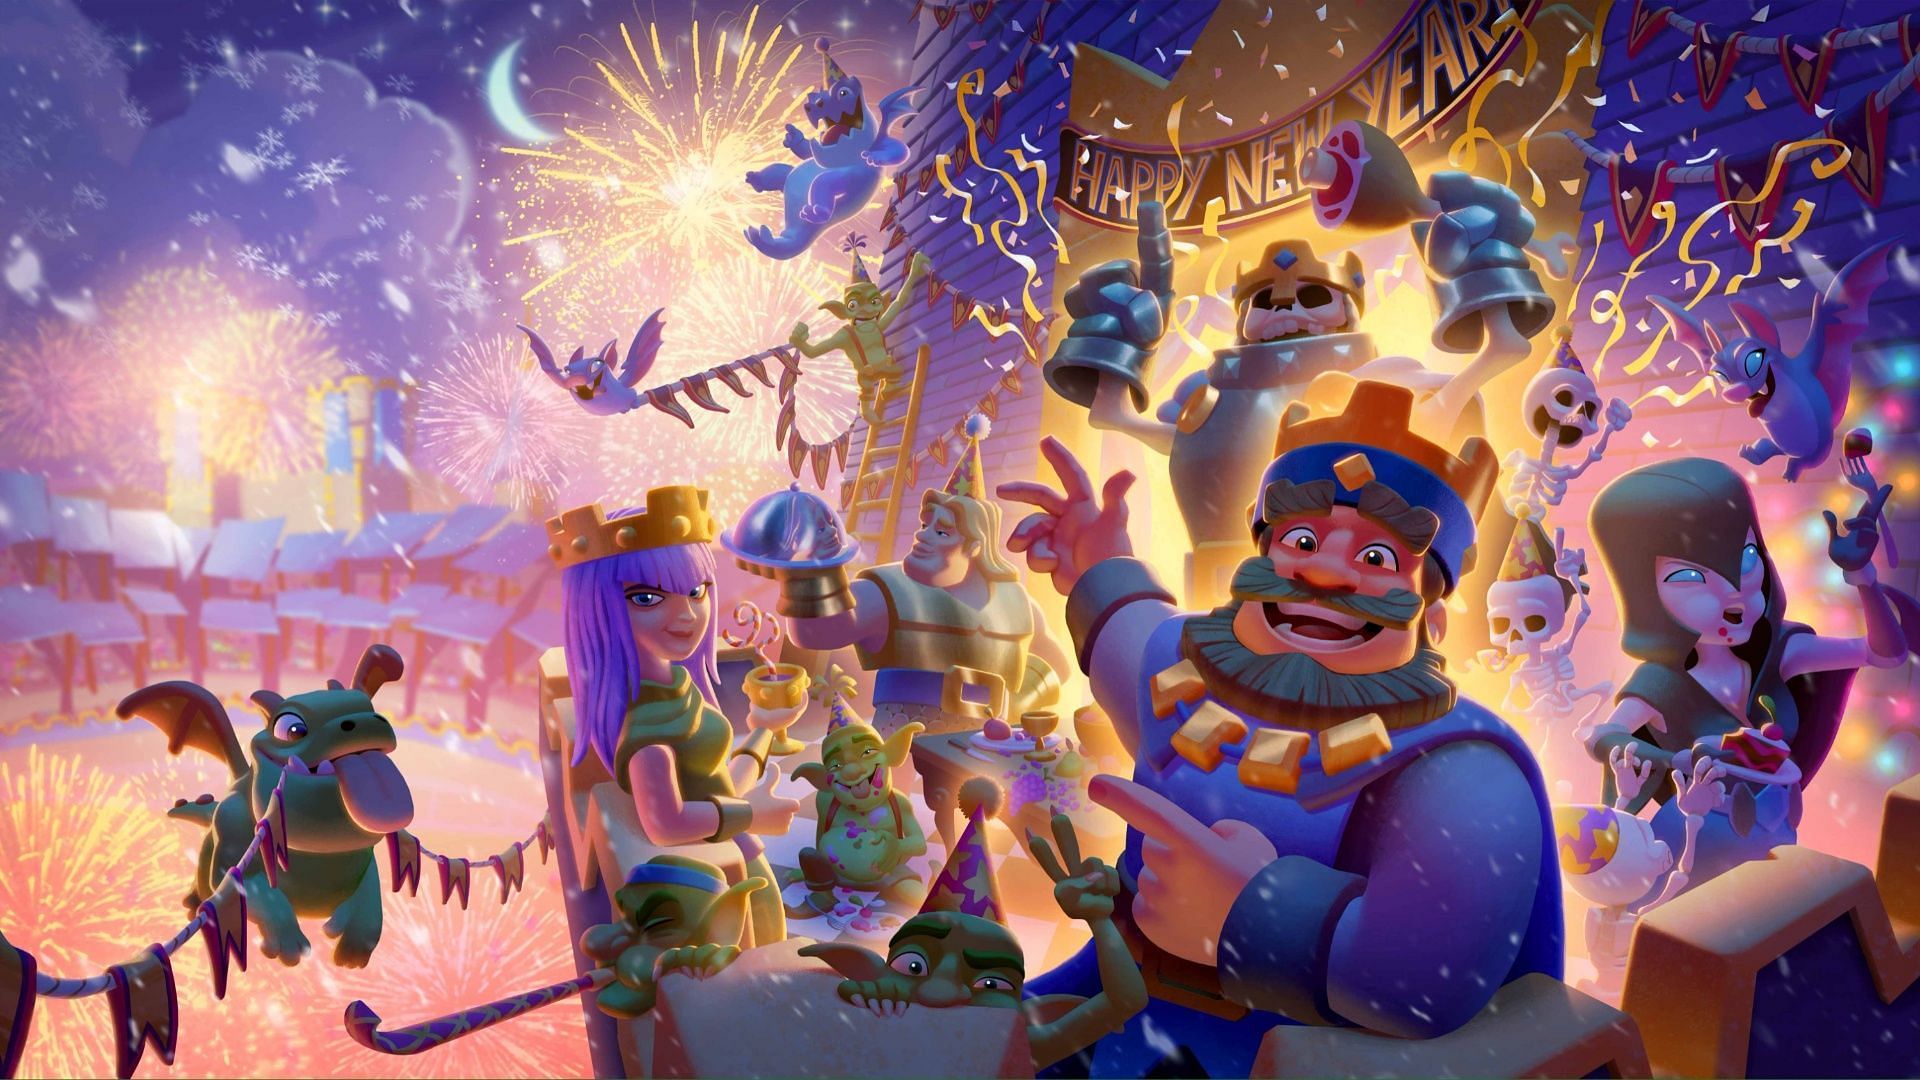 A new update is coming to Clash Royale (Image via Supercell)